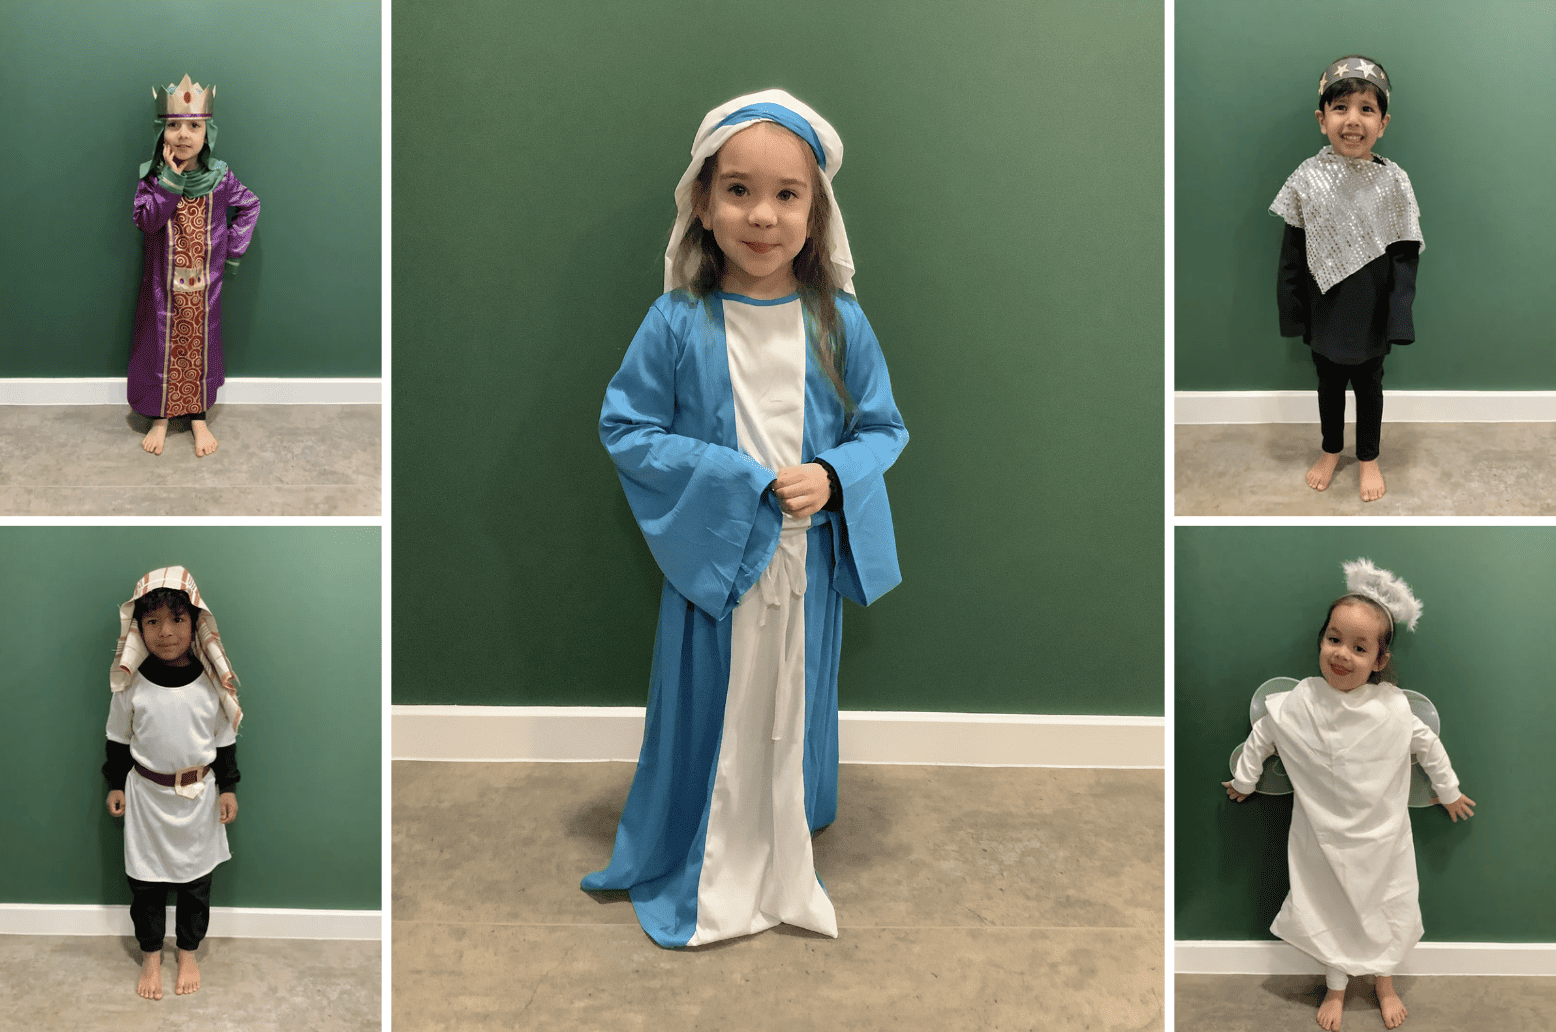 Pupils all dressed up in their nativity costumes.